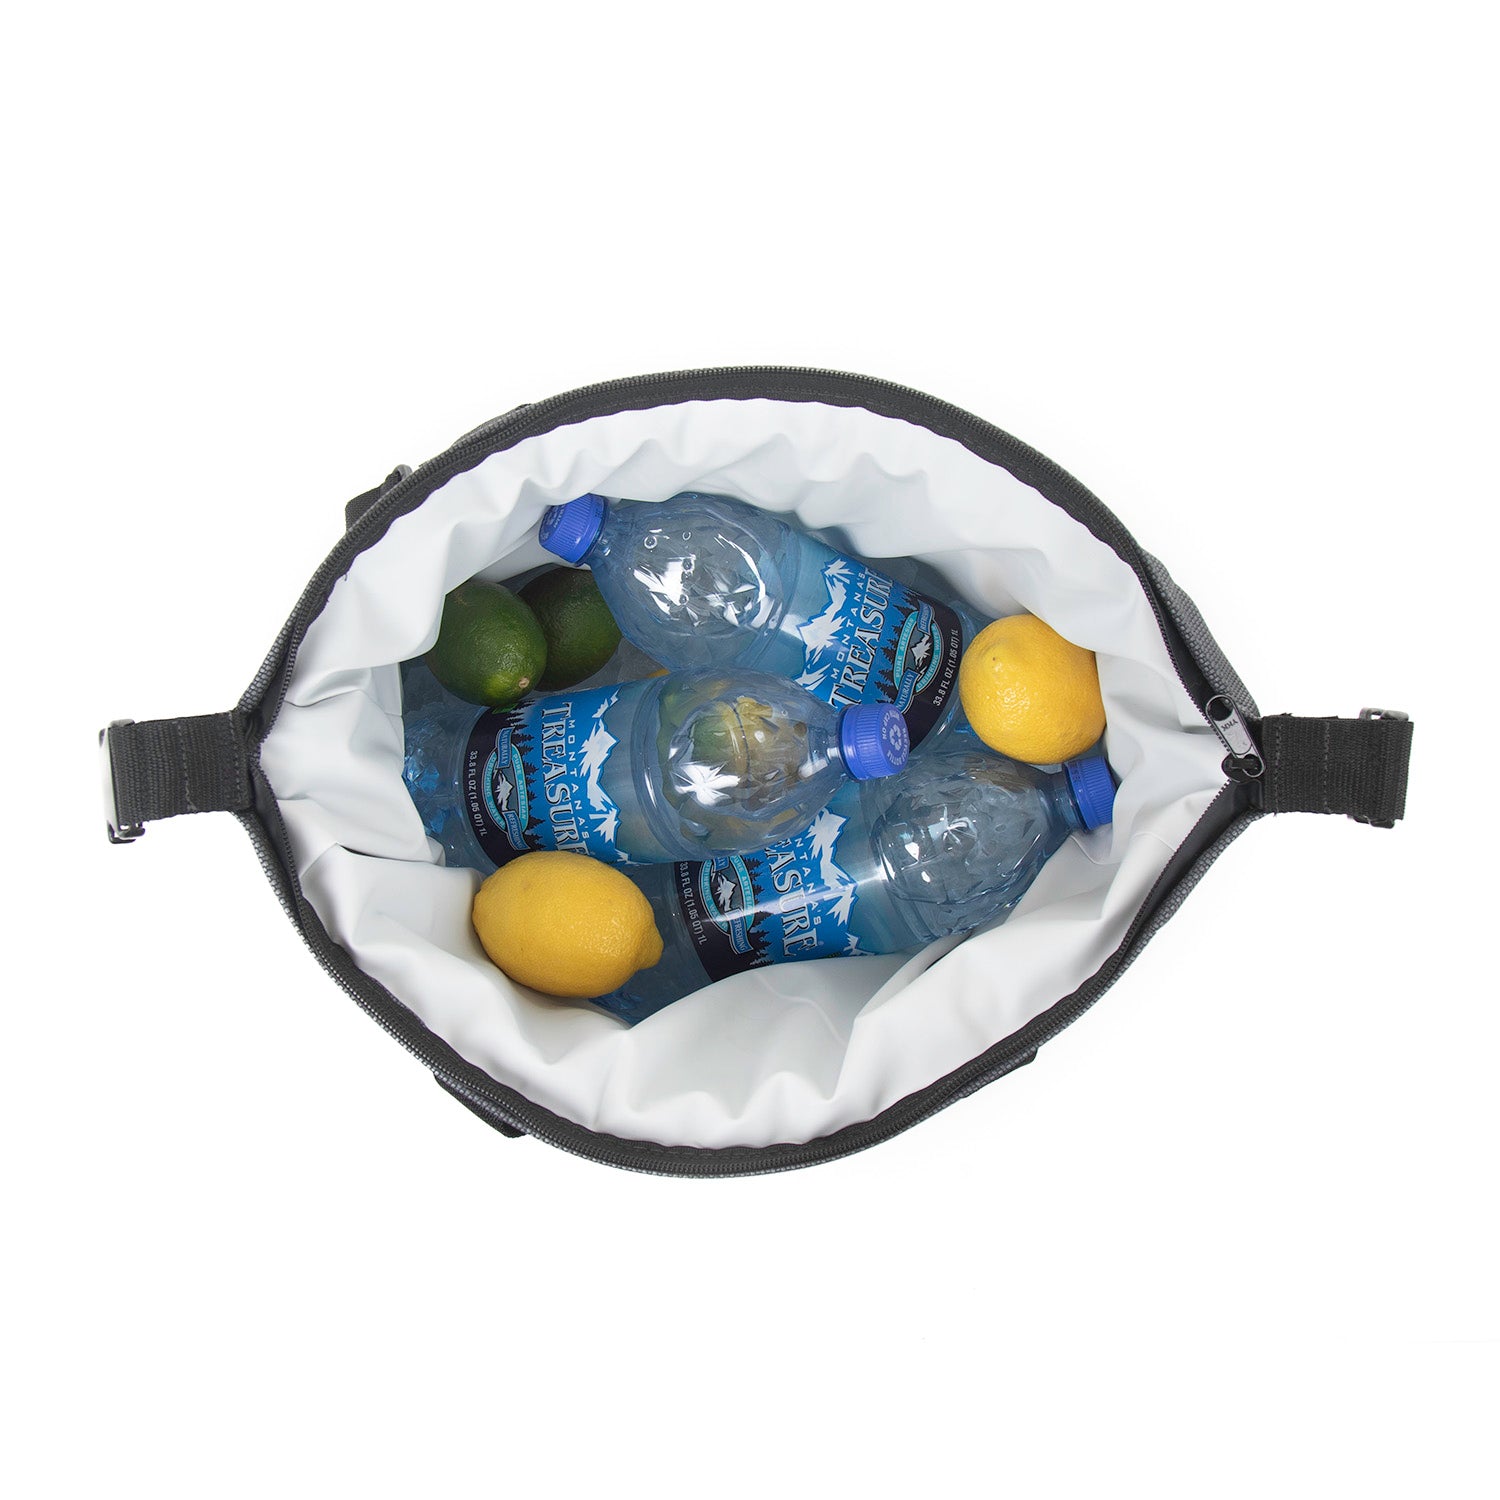 Top view with water bottles and limes and lemons 